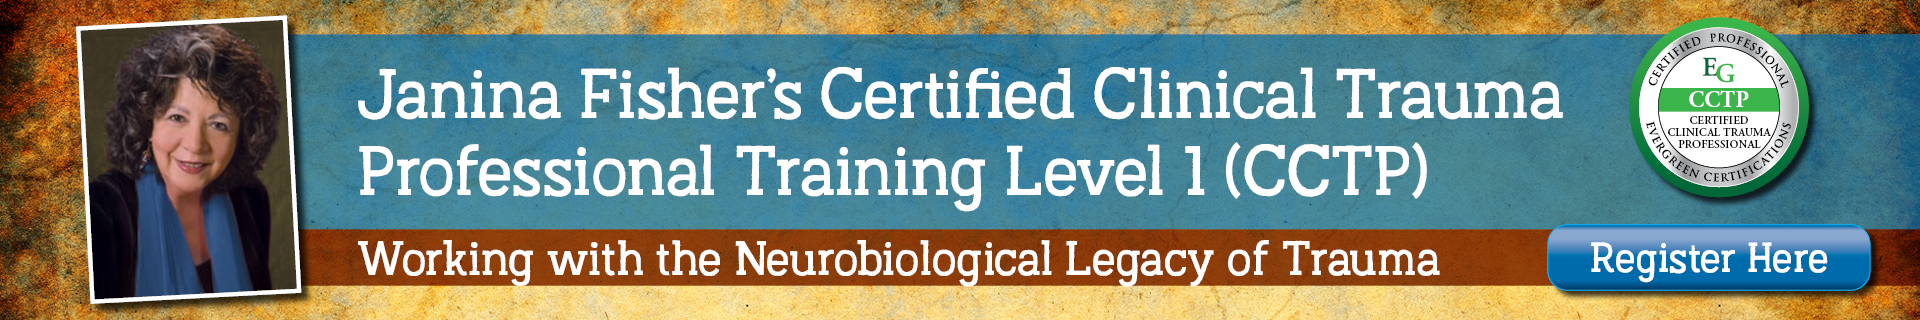 Janina Fisher’s Certified Clinical Trauma Professional Training Level 1 (CCTP): Working with the Neurobiological Legacy of Trauma